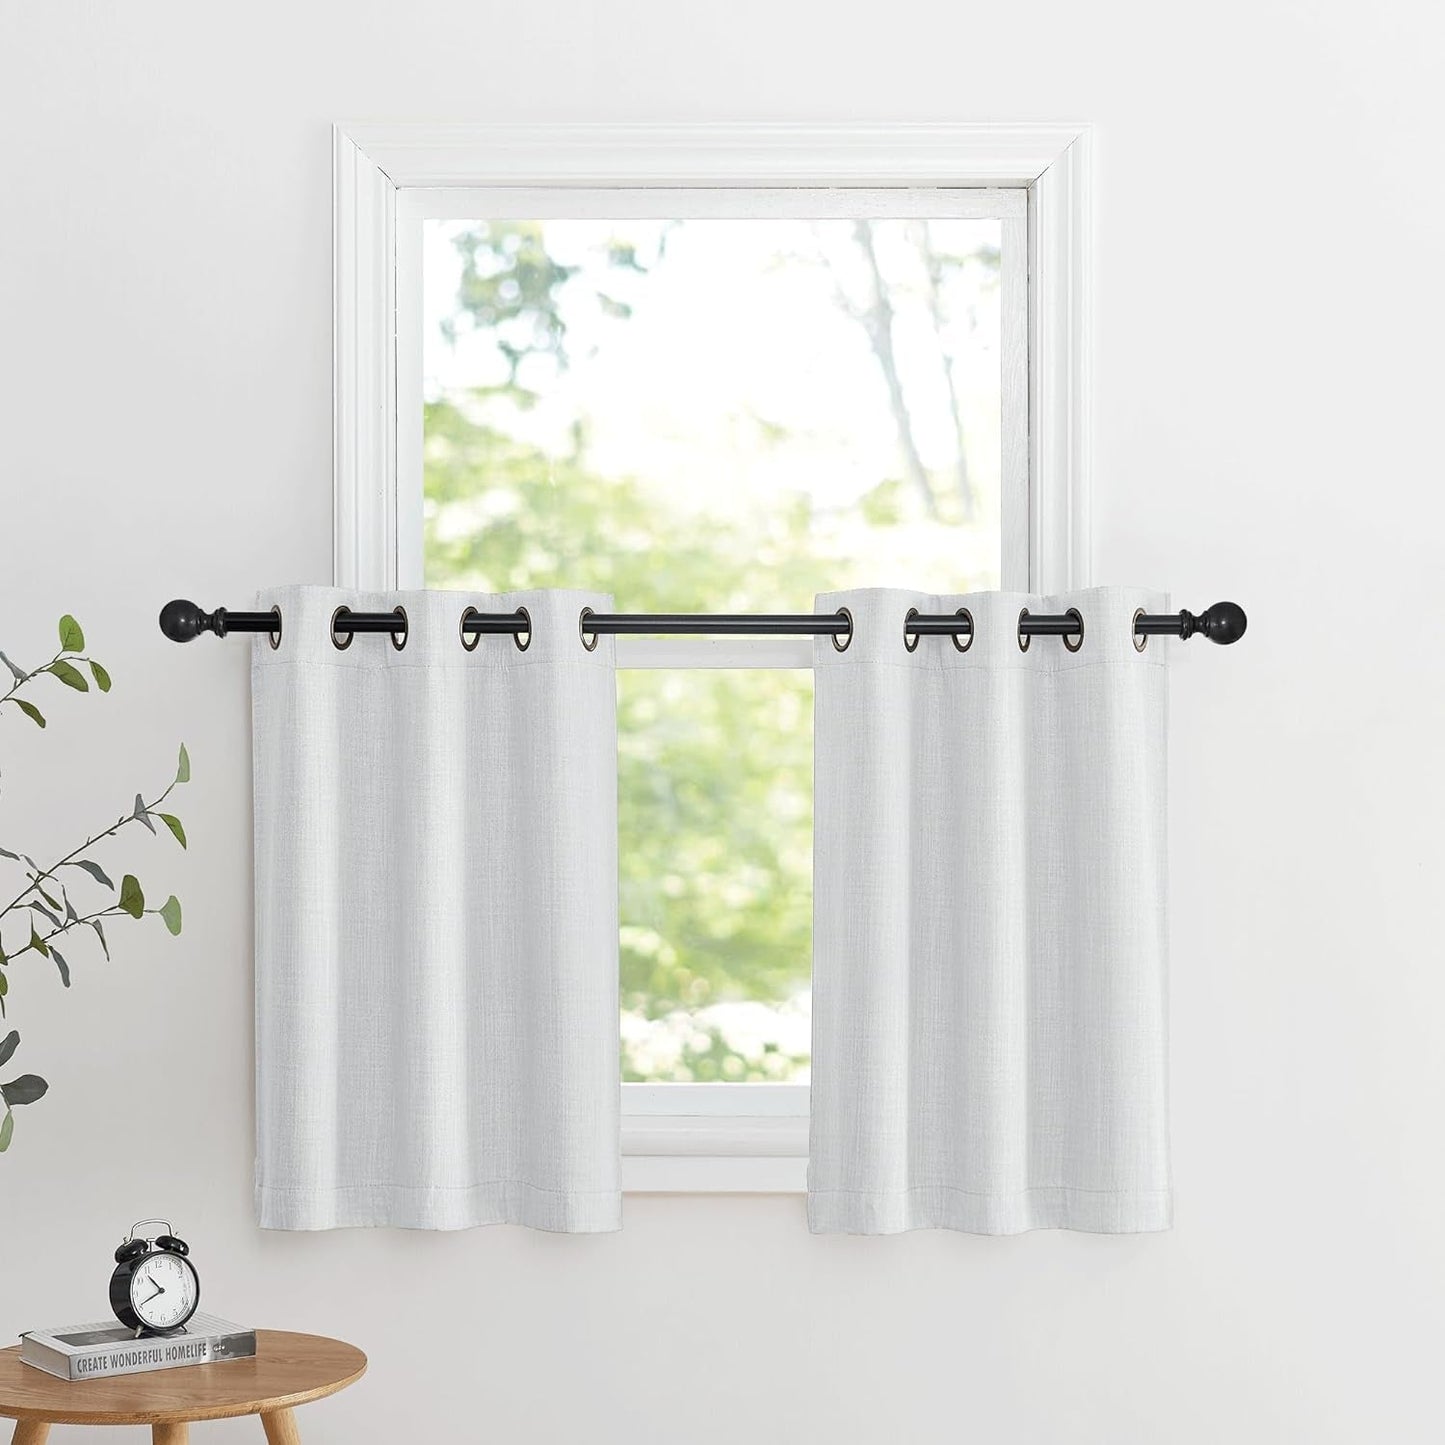 NICETOWN Linen Curtain Valances for Living Room 30 Inch Length 2 Panels, Grommet Top Light Blocking Room Darkening Curtains Thermal Insulated Window Tiers for Barhtoom Window, Angora, W50 X L30